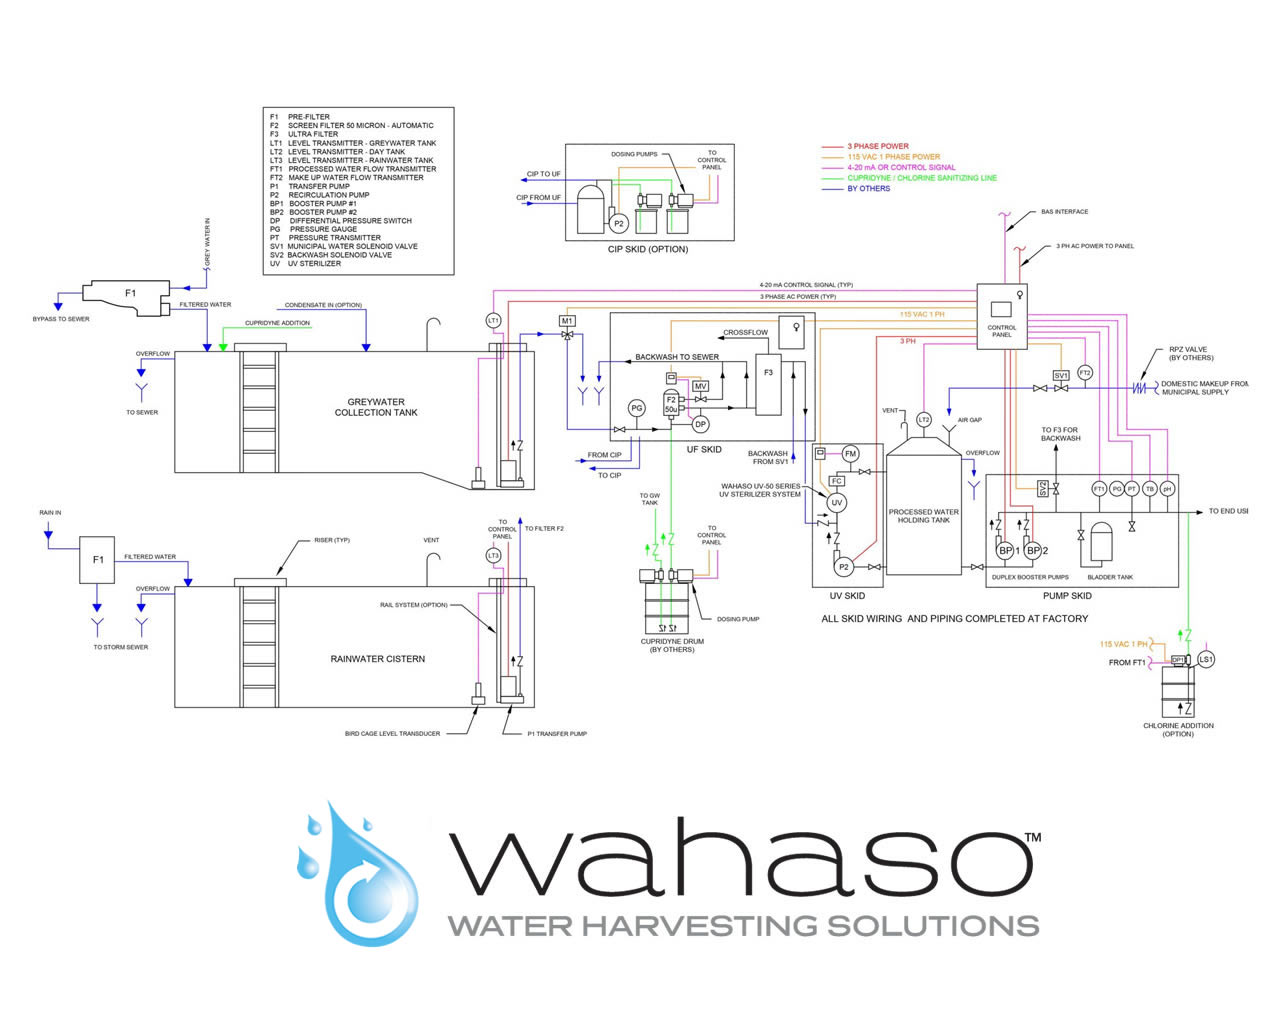 wahaso-multi-source-water-harvesting-systems-2